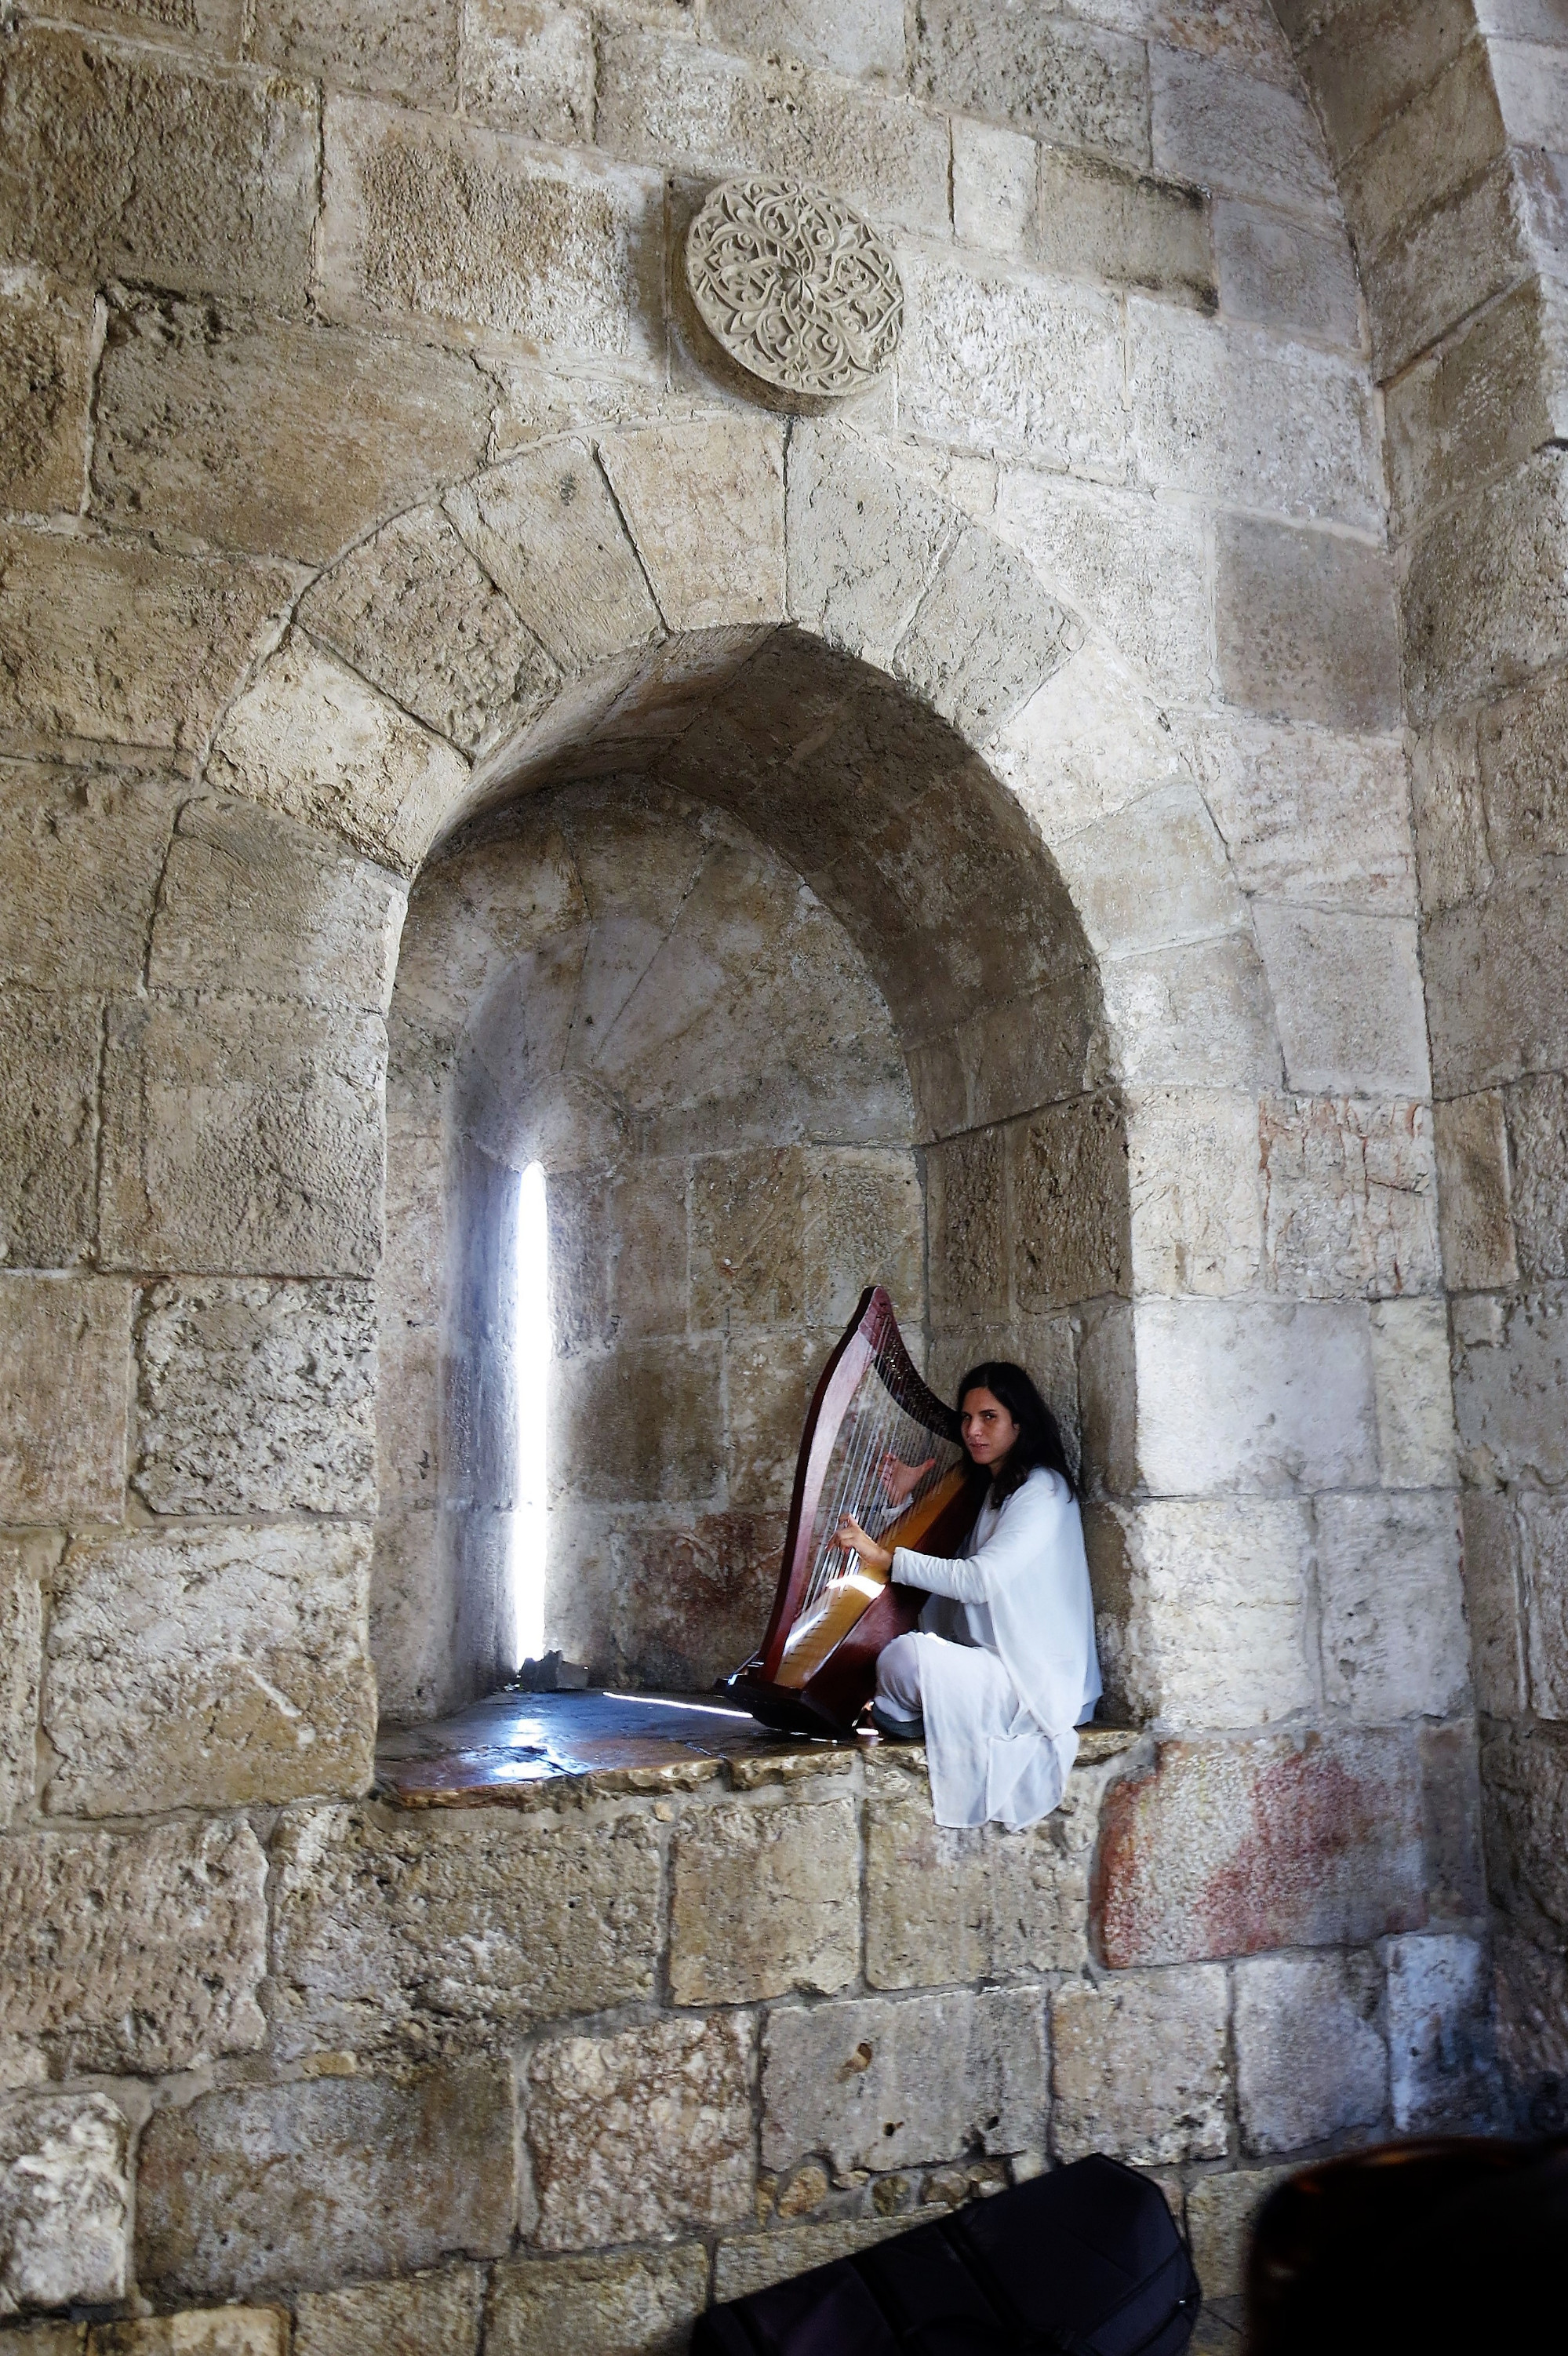 A girl plays the harp seated in a window of the Jaffa Gate